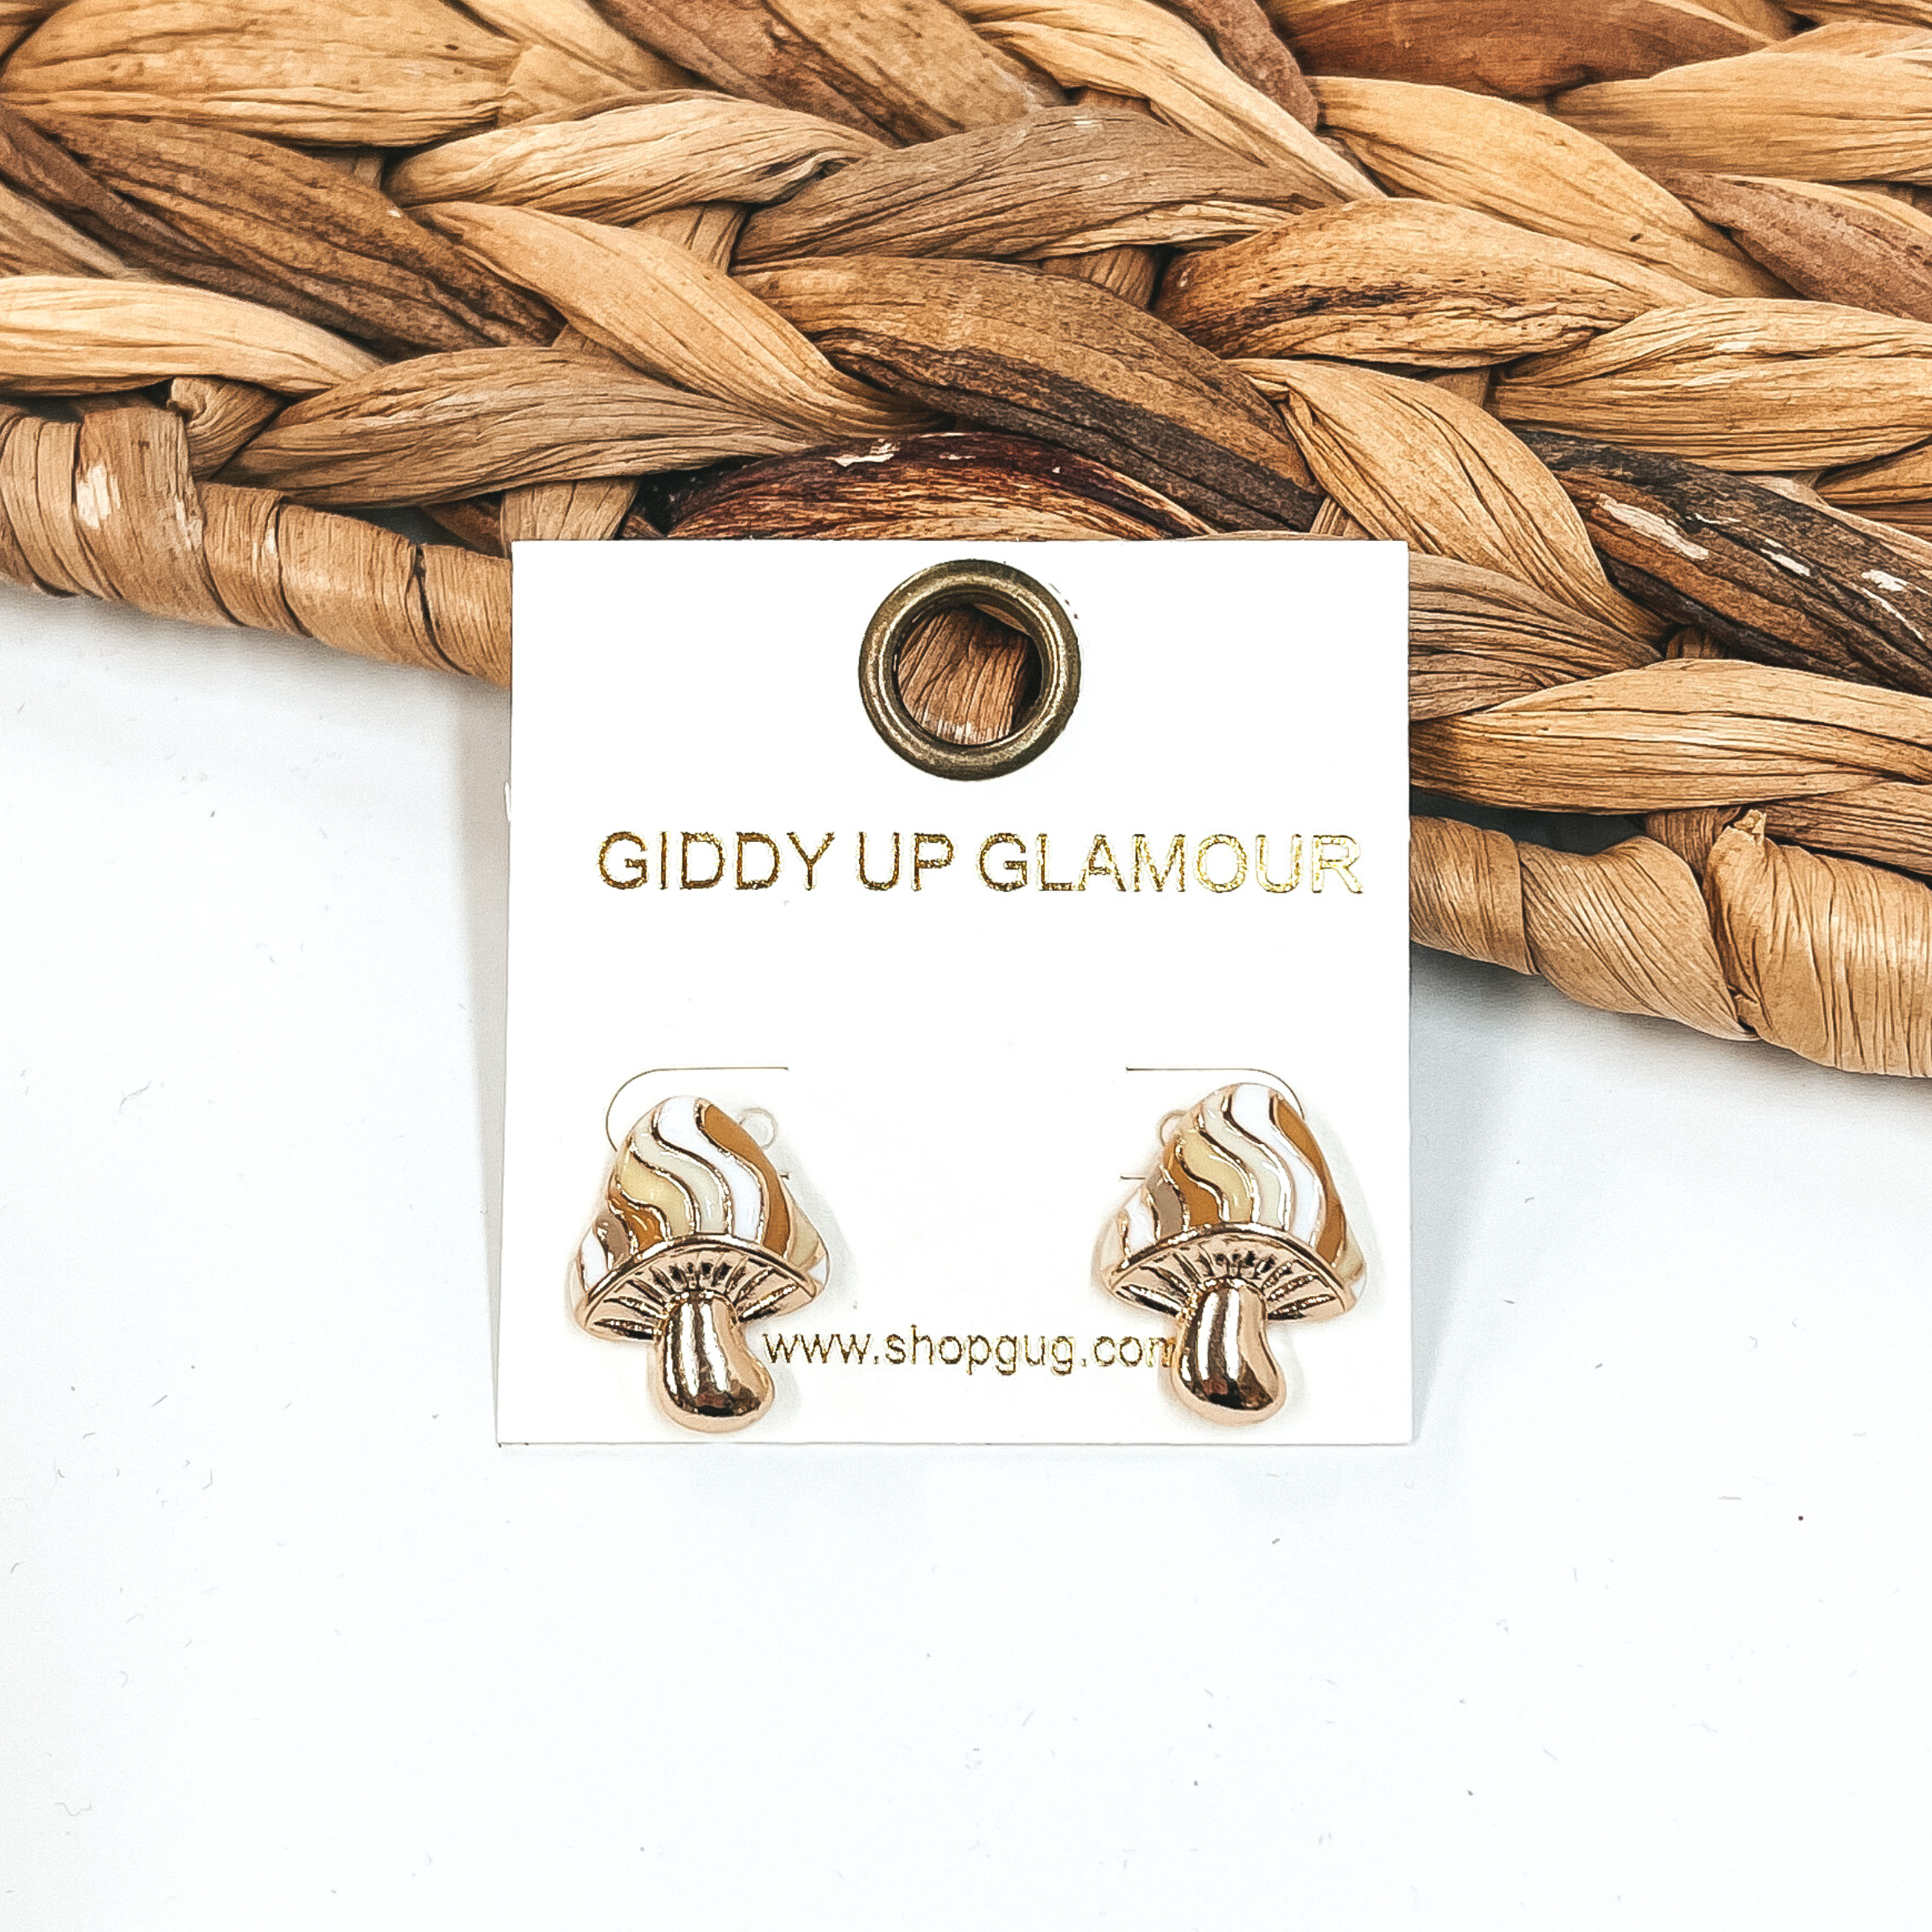 Gold, mushroom shaped earrings. The top part of the mushroom has different shades of ivory stripes. These earrings are pictured in front of a basket weave material on a white background.